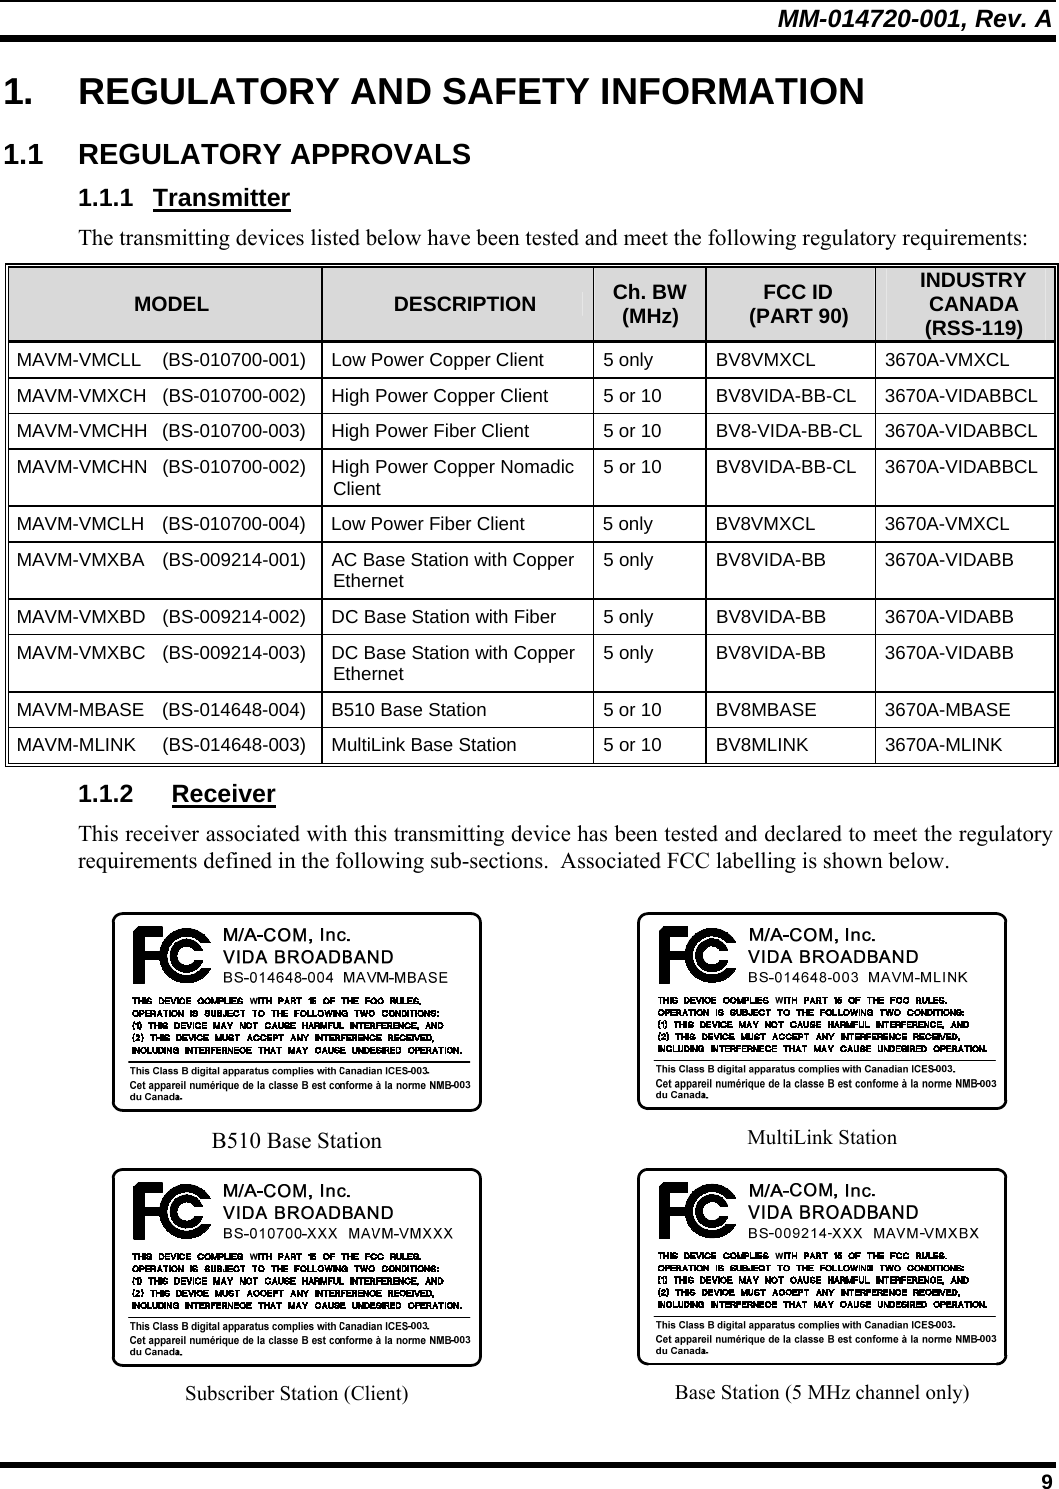 MM-014720-001, Rev. A  9 1.  REGULATORY AND SAFETY INFORMATION 1.1 REGULATORY APPROVALS 1.1.1 Transmitter The transmitting devices listed below have been tested and meet the following regulatory requirements: MODEL  DESCRIPTION  Ch. BW(MHz)  FCC ID (PART 90) INDUSTRY CANADA (RSS-119) MAVM-VMCLL   (BS-010700-001)  Low Power Copper Client  5 only  BV8VMXCL  3670A-VMXCL MAVM-VMXCH   (BS-010700-002)  High Power Copper Client  5 or 10  BV8VIDA-BB-CL  3670A-VIDABBCL MAVM-VMCHH   (BS-010700-003)  High Power Fiber Client  5 or 10  BV8-VIDA-BB-CL  3670A-VIDABBCL MAVM-VMCHN   (BS-010700-002)  High Power Copper Nomadic Client  5 or 10  BV8VIDA-BB-CL  3670A-VIDABBCL MAVM-VMCLH   (BS-010700-004)  Low Power Fiber Client  5 only  BV8VMXCL  3670A-VMXCL MAVM-VMXBA   (BS-009214-001)  AC Base Station with Copper Ethernet  5 only  BV8VIDA-BB  3670A-VIDABB MAVM-VMXBD   (BS-009214-002)  DC Base Station with Fiber  5 only  BV8VIDA-BB  3670A-VIDABB MAVM-VMXBC   (BS-009214-003)  DC Base Station with Copper Ethernet  5 only  BV8VIDA-BB  3670A-VIDABB MAVM-MBASE   (BS-014648-004)  B510 Base Station   5 or 10  BV8MBASE  3670A-MBASE MAVM-MLINK   (BS-014648-003)  MultiLink Base Station   5 or 10  BV8MLINK  3670A-MLINK 1.1.2 Receiver This receiver associated with this transmitting device has been tested and declared to meet the regulatory requirements defined in the following sub-sections.  Associated FCC labelling is shown below.   B510 Base Station   MultiLink Station  Subscriber Station (Client)   Base Station (5 MHz channel only) 